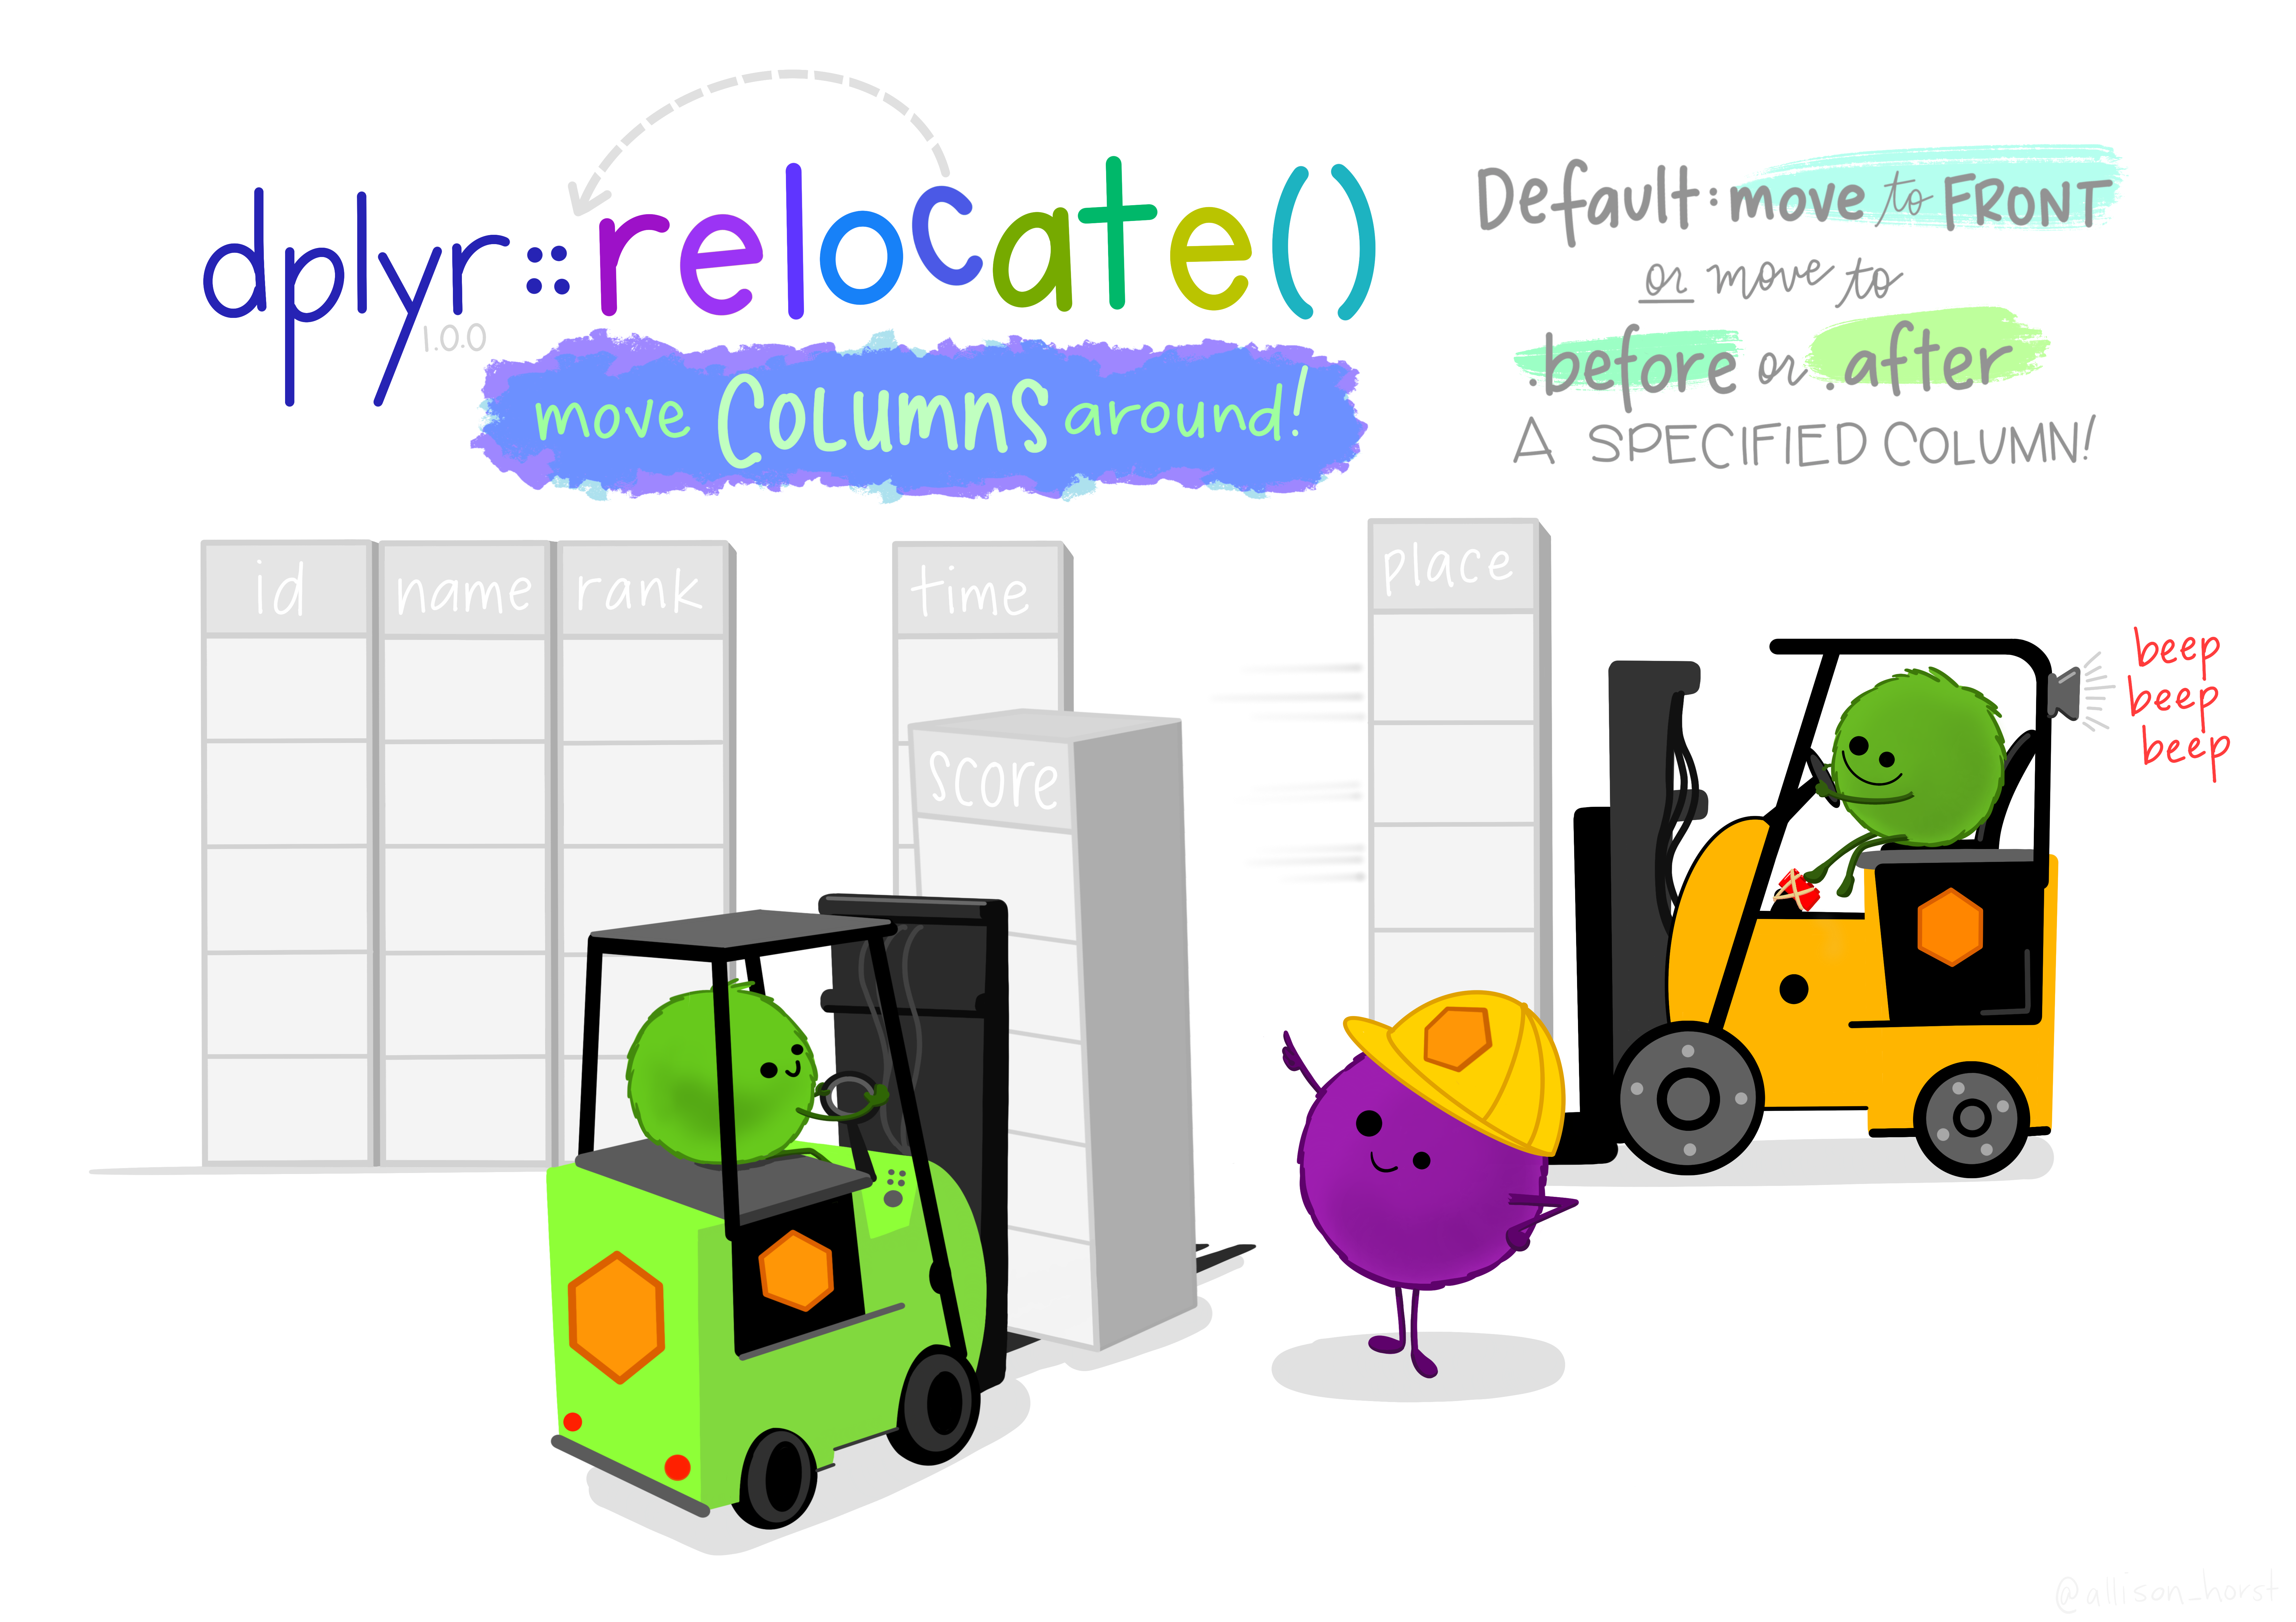 dplyr_relocate.png